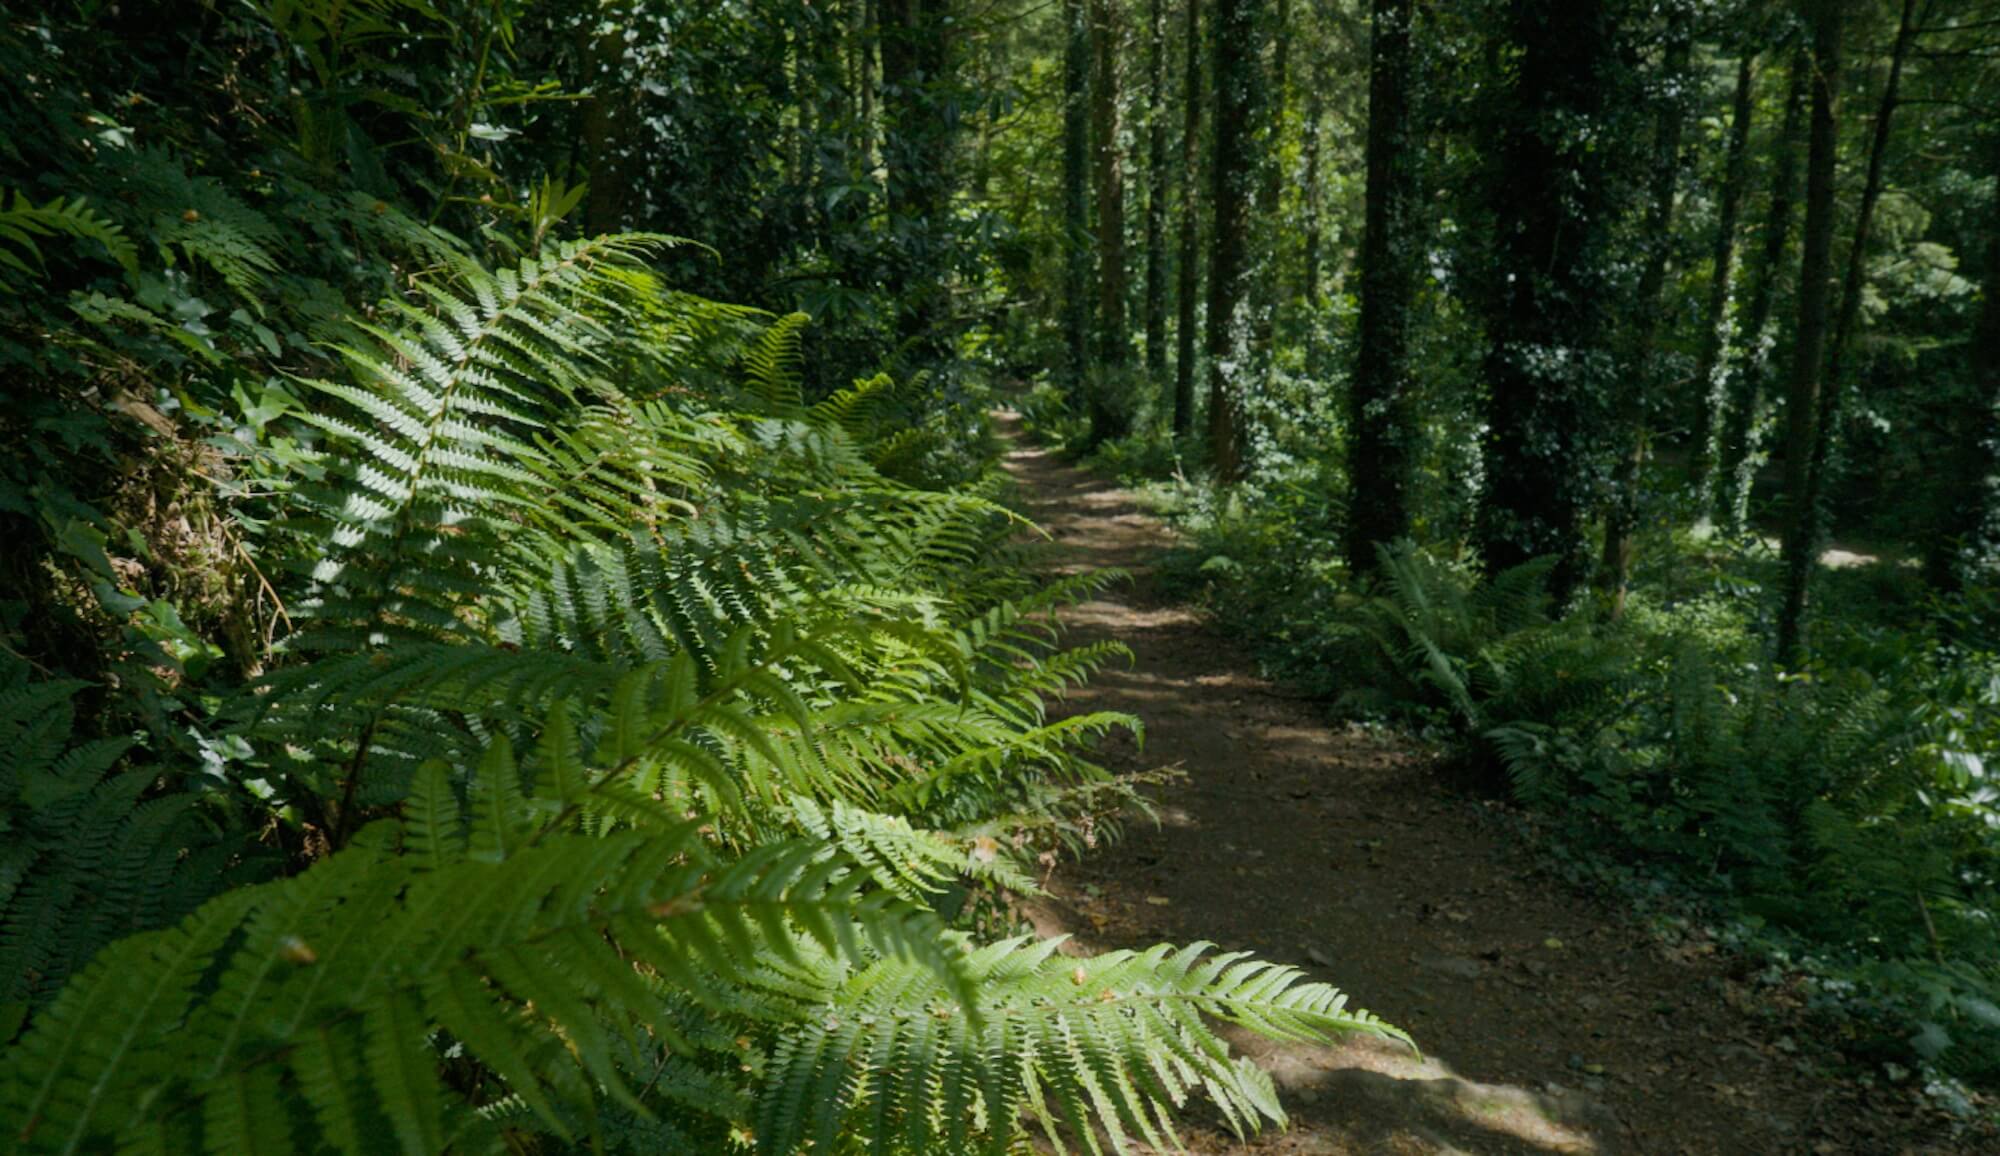 Ferns in the forest at Parc Glynllifon